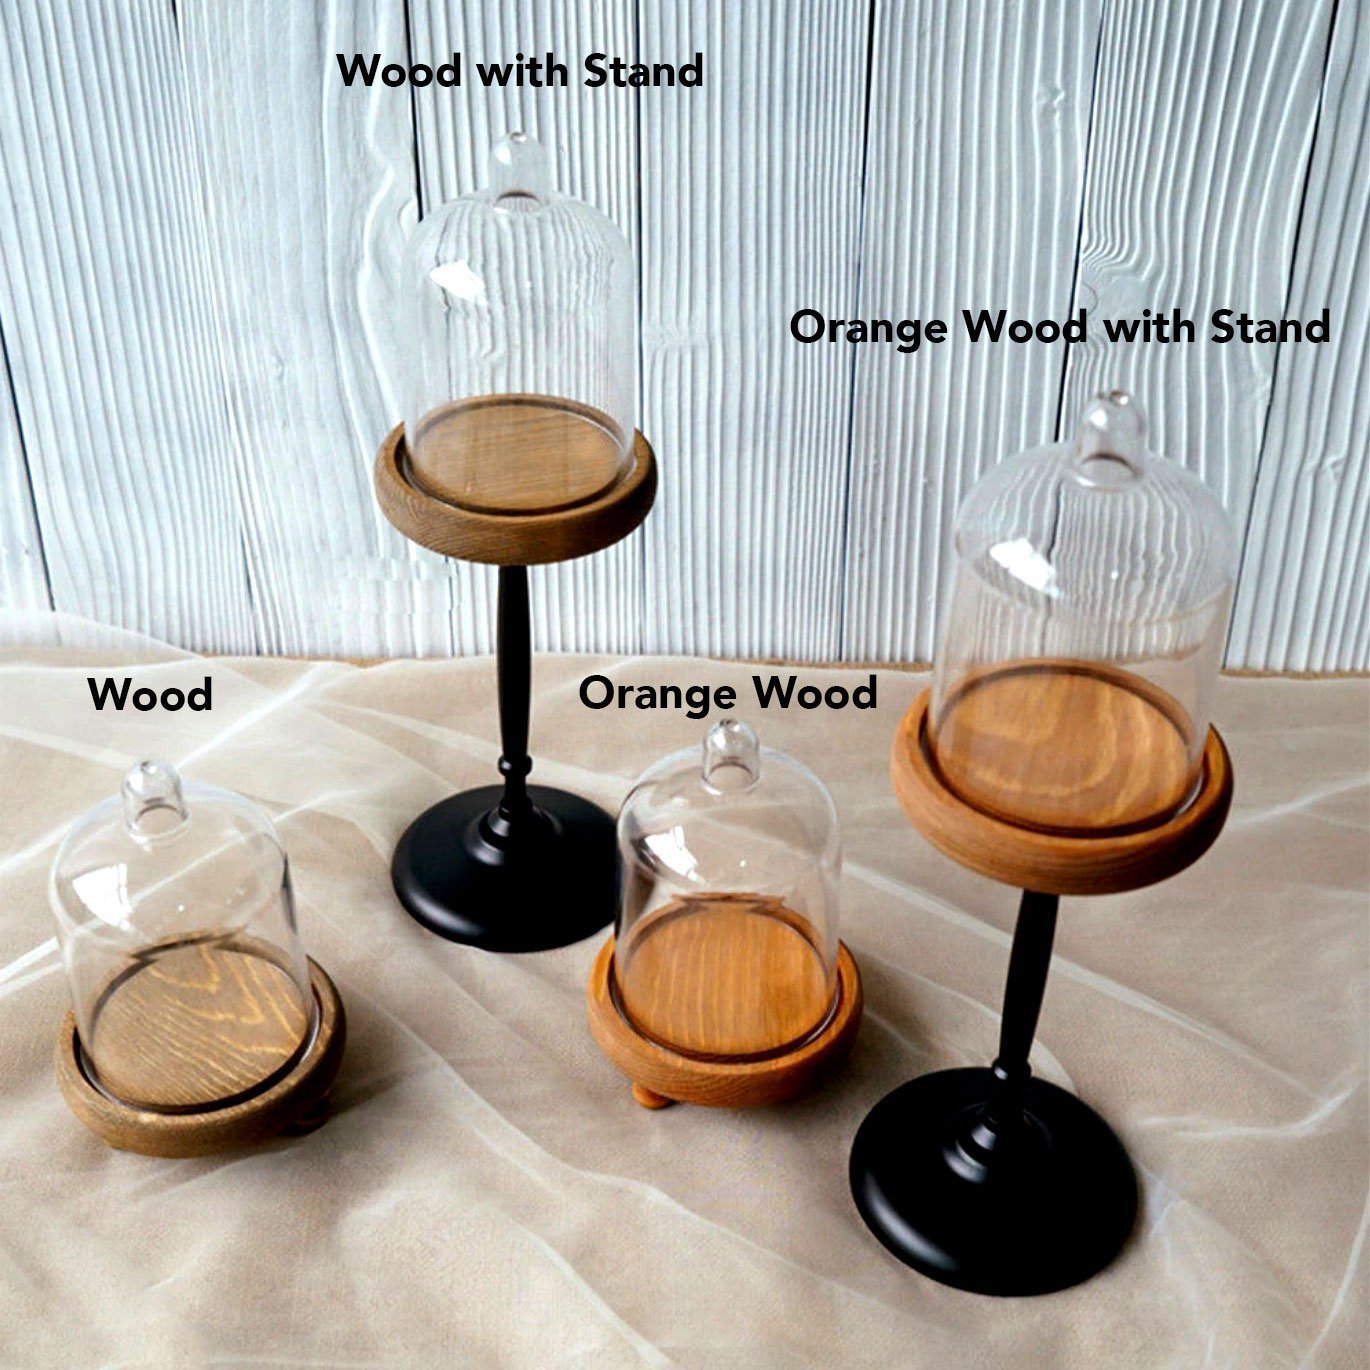 Wood Cupcake Stand - Nordic Side - 